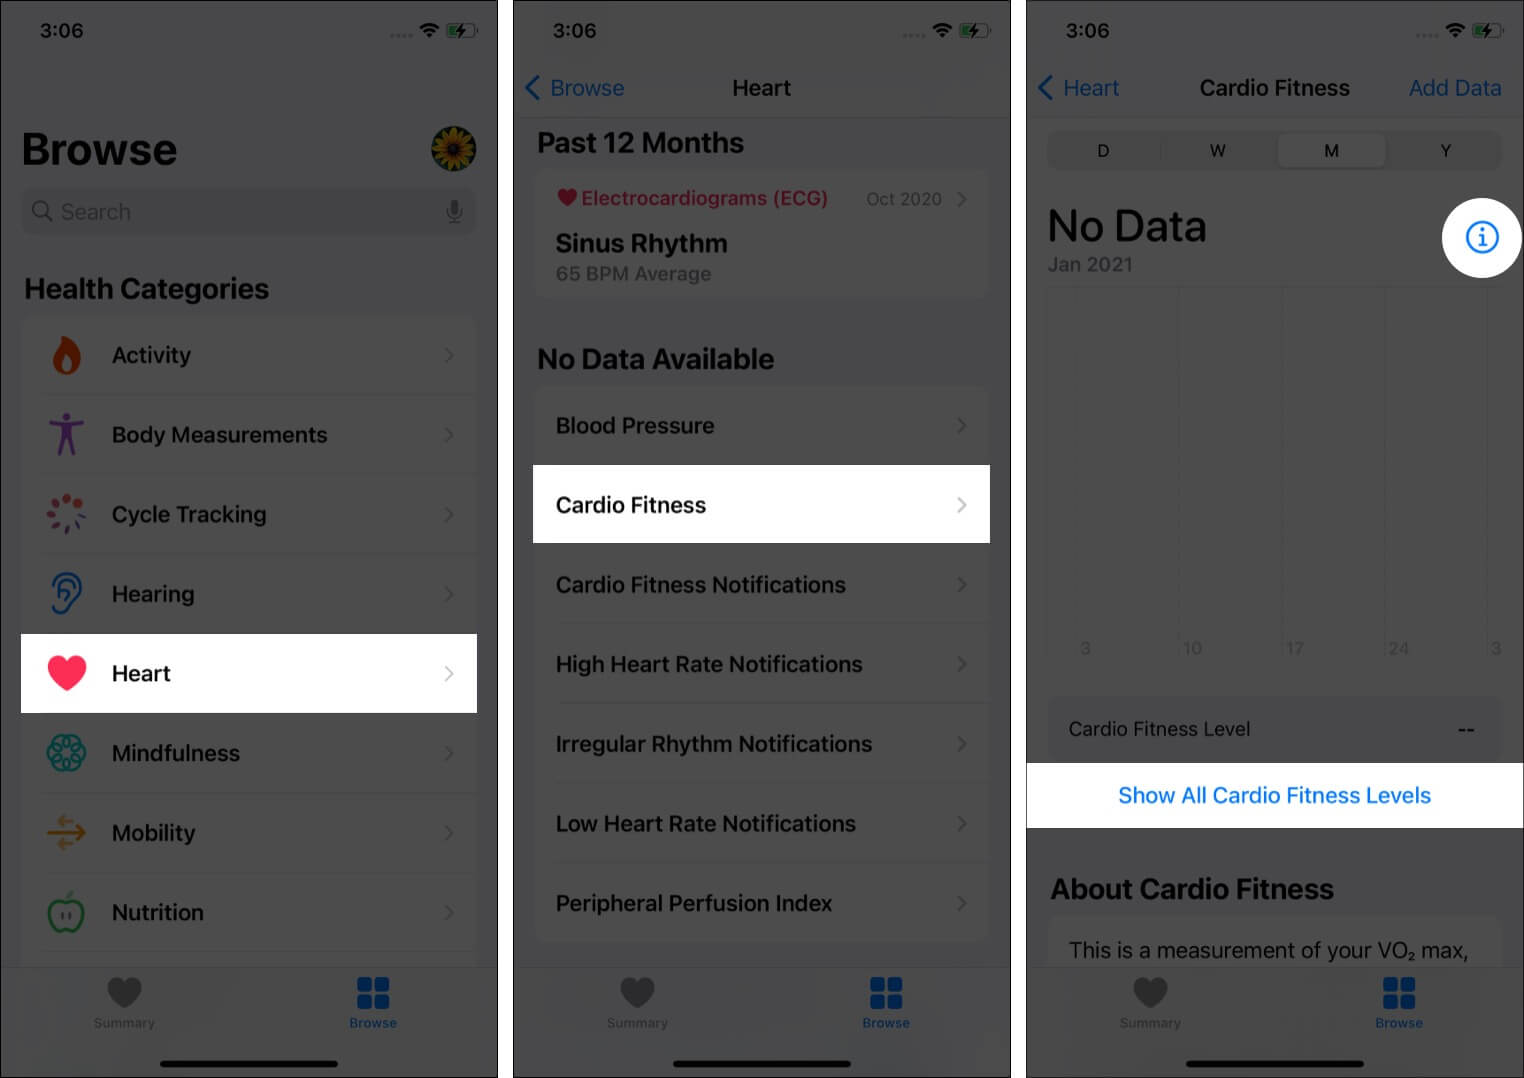 How to view your cardio fitness data in Health app